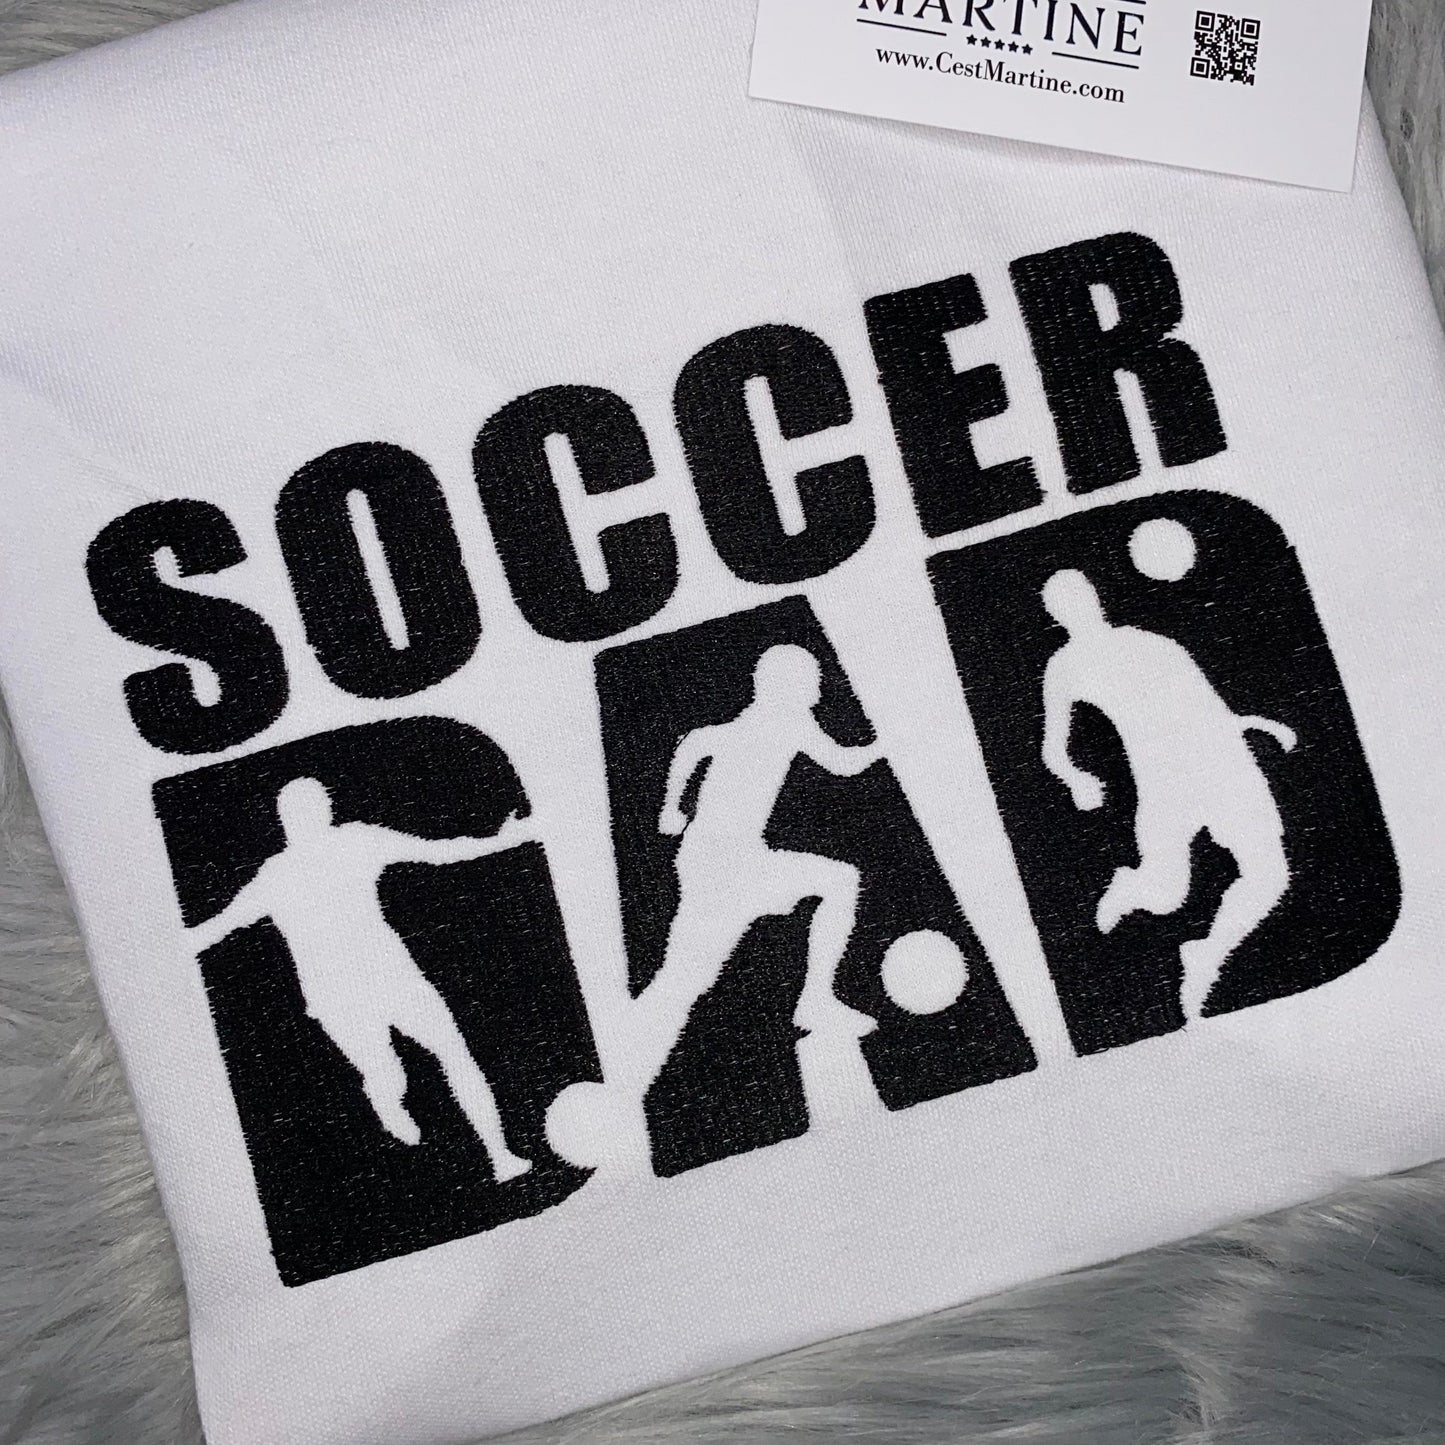 Father's Day, Soccer, Soccer Dad, Soccer Lover, Embroidered T Shirt, Gift, Birthday, Anniversary